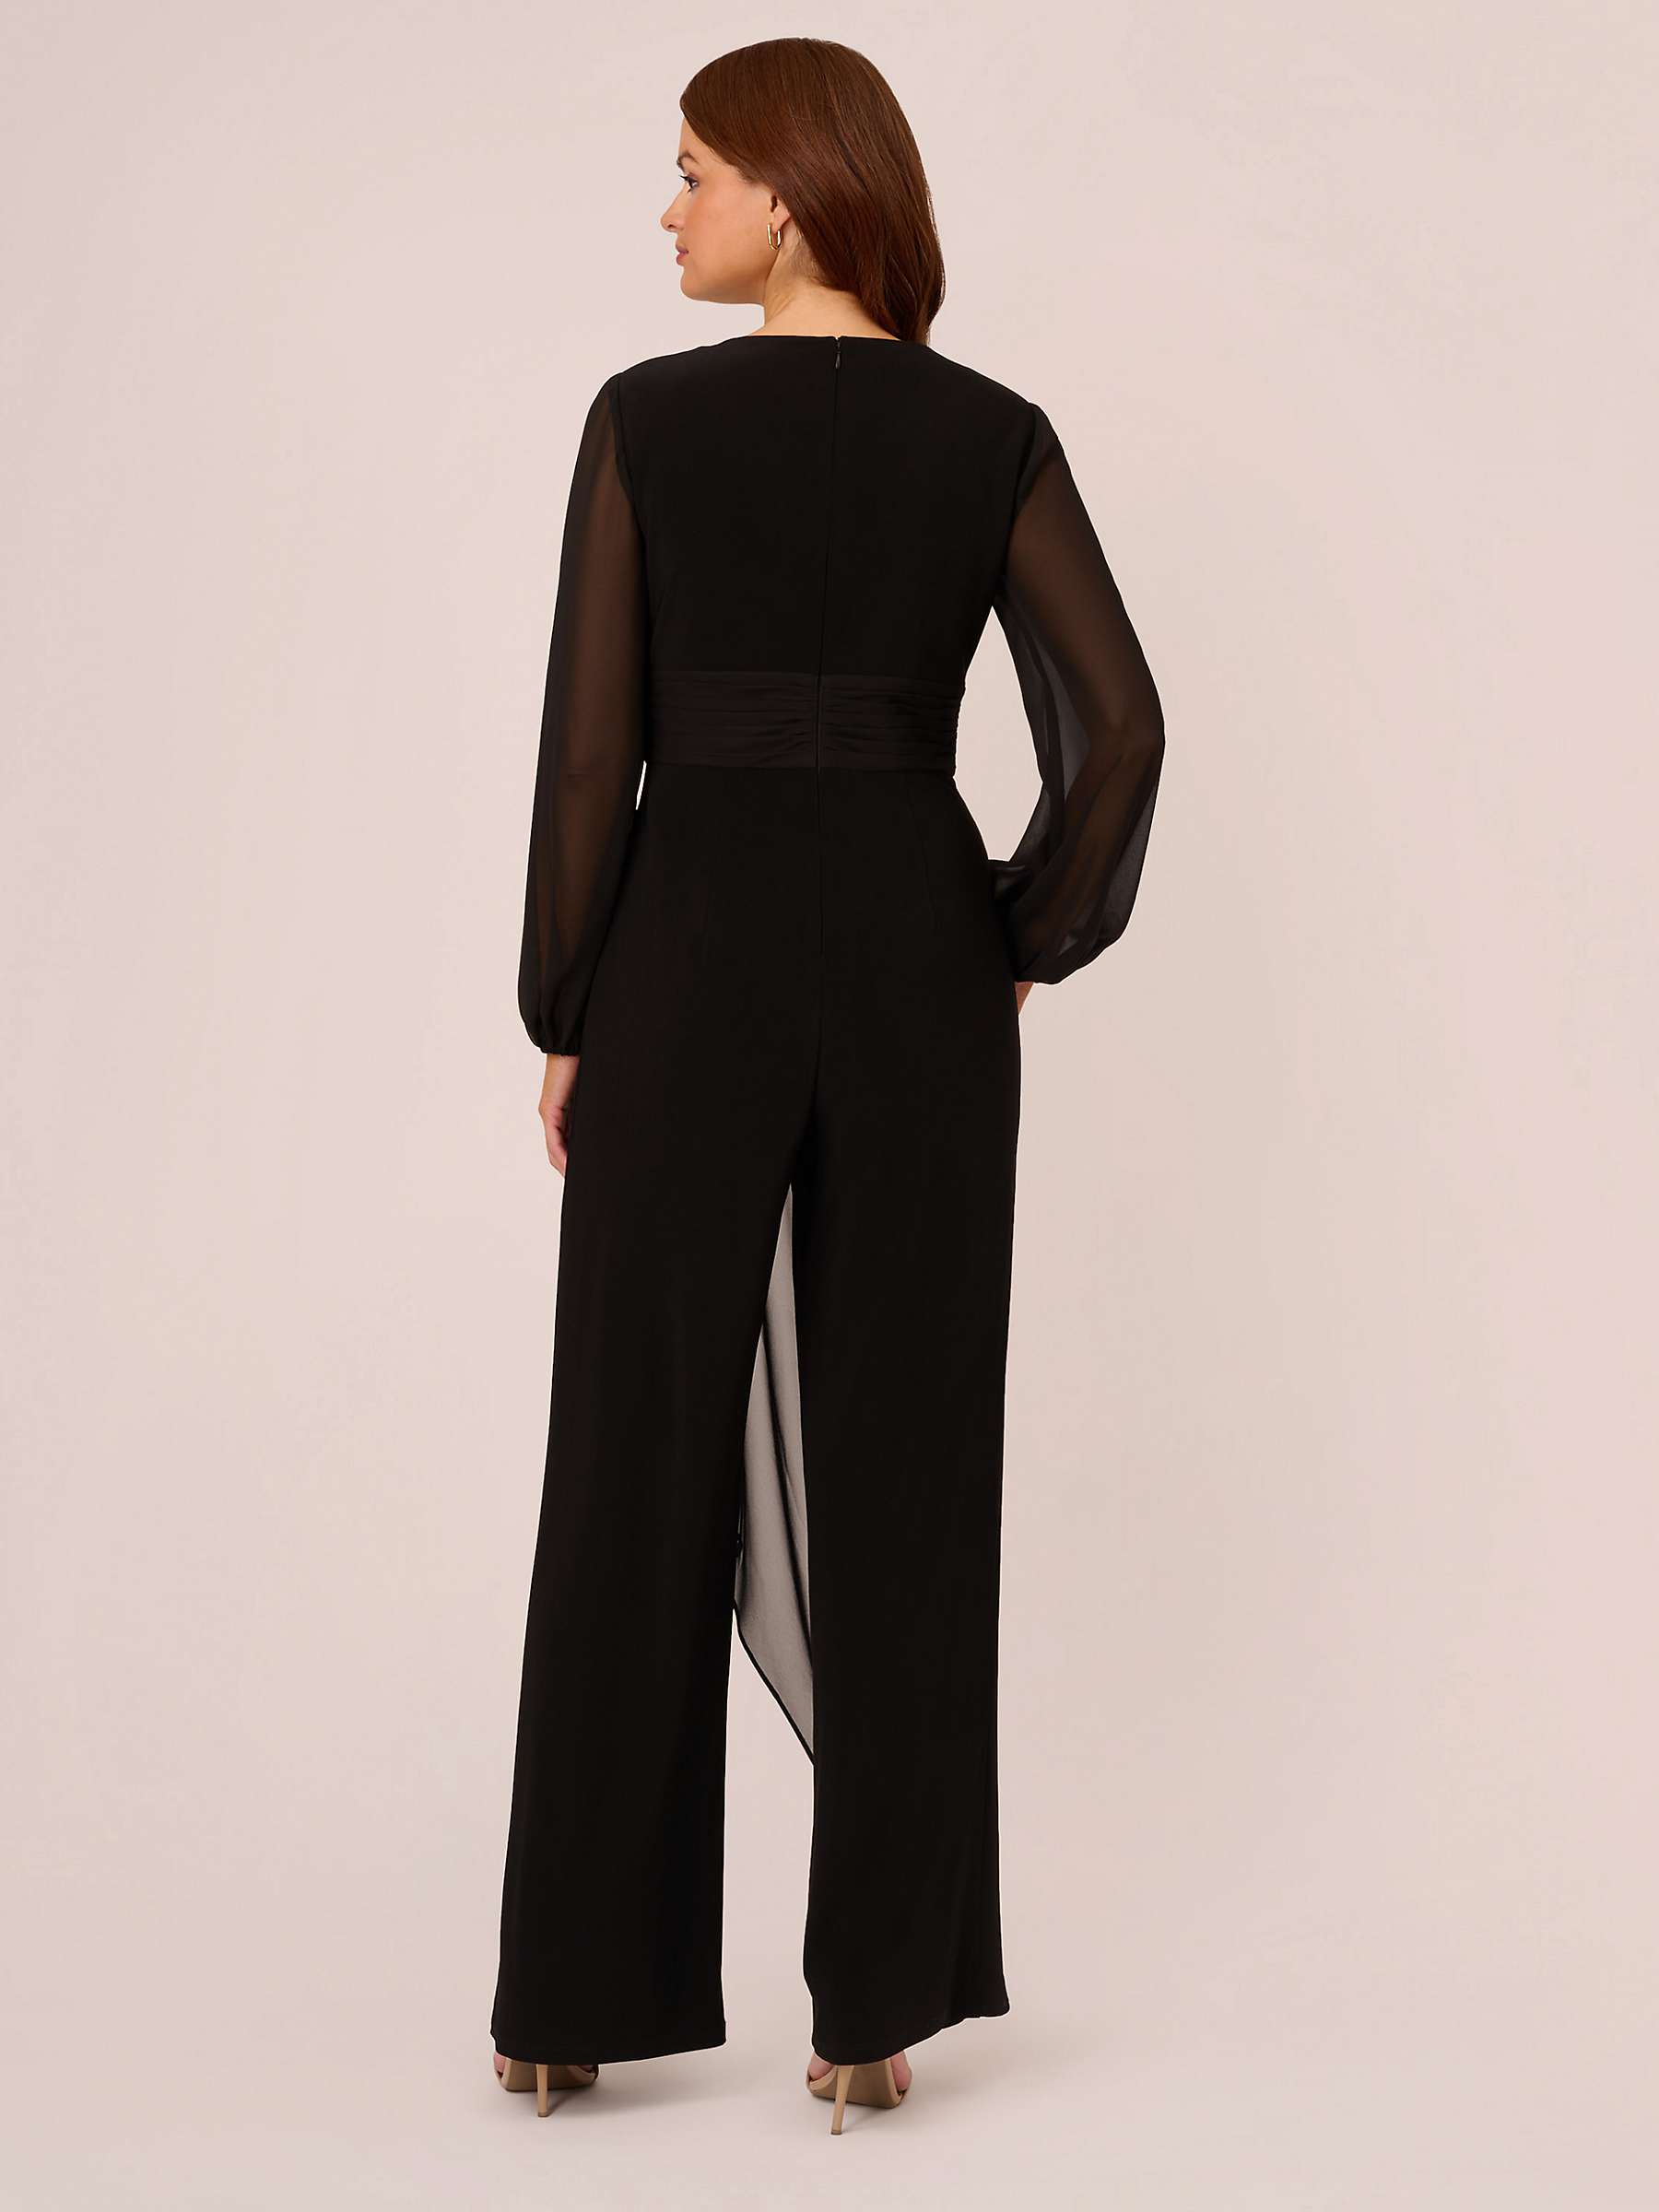 Buy Adrianna Papell Jersey Chiffon Combo Jumpsuit, Black Online at johnlewis.com